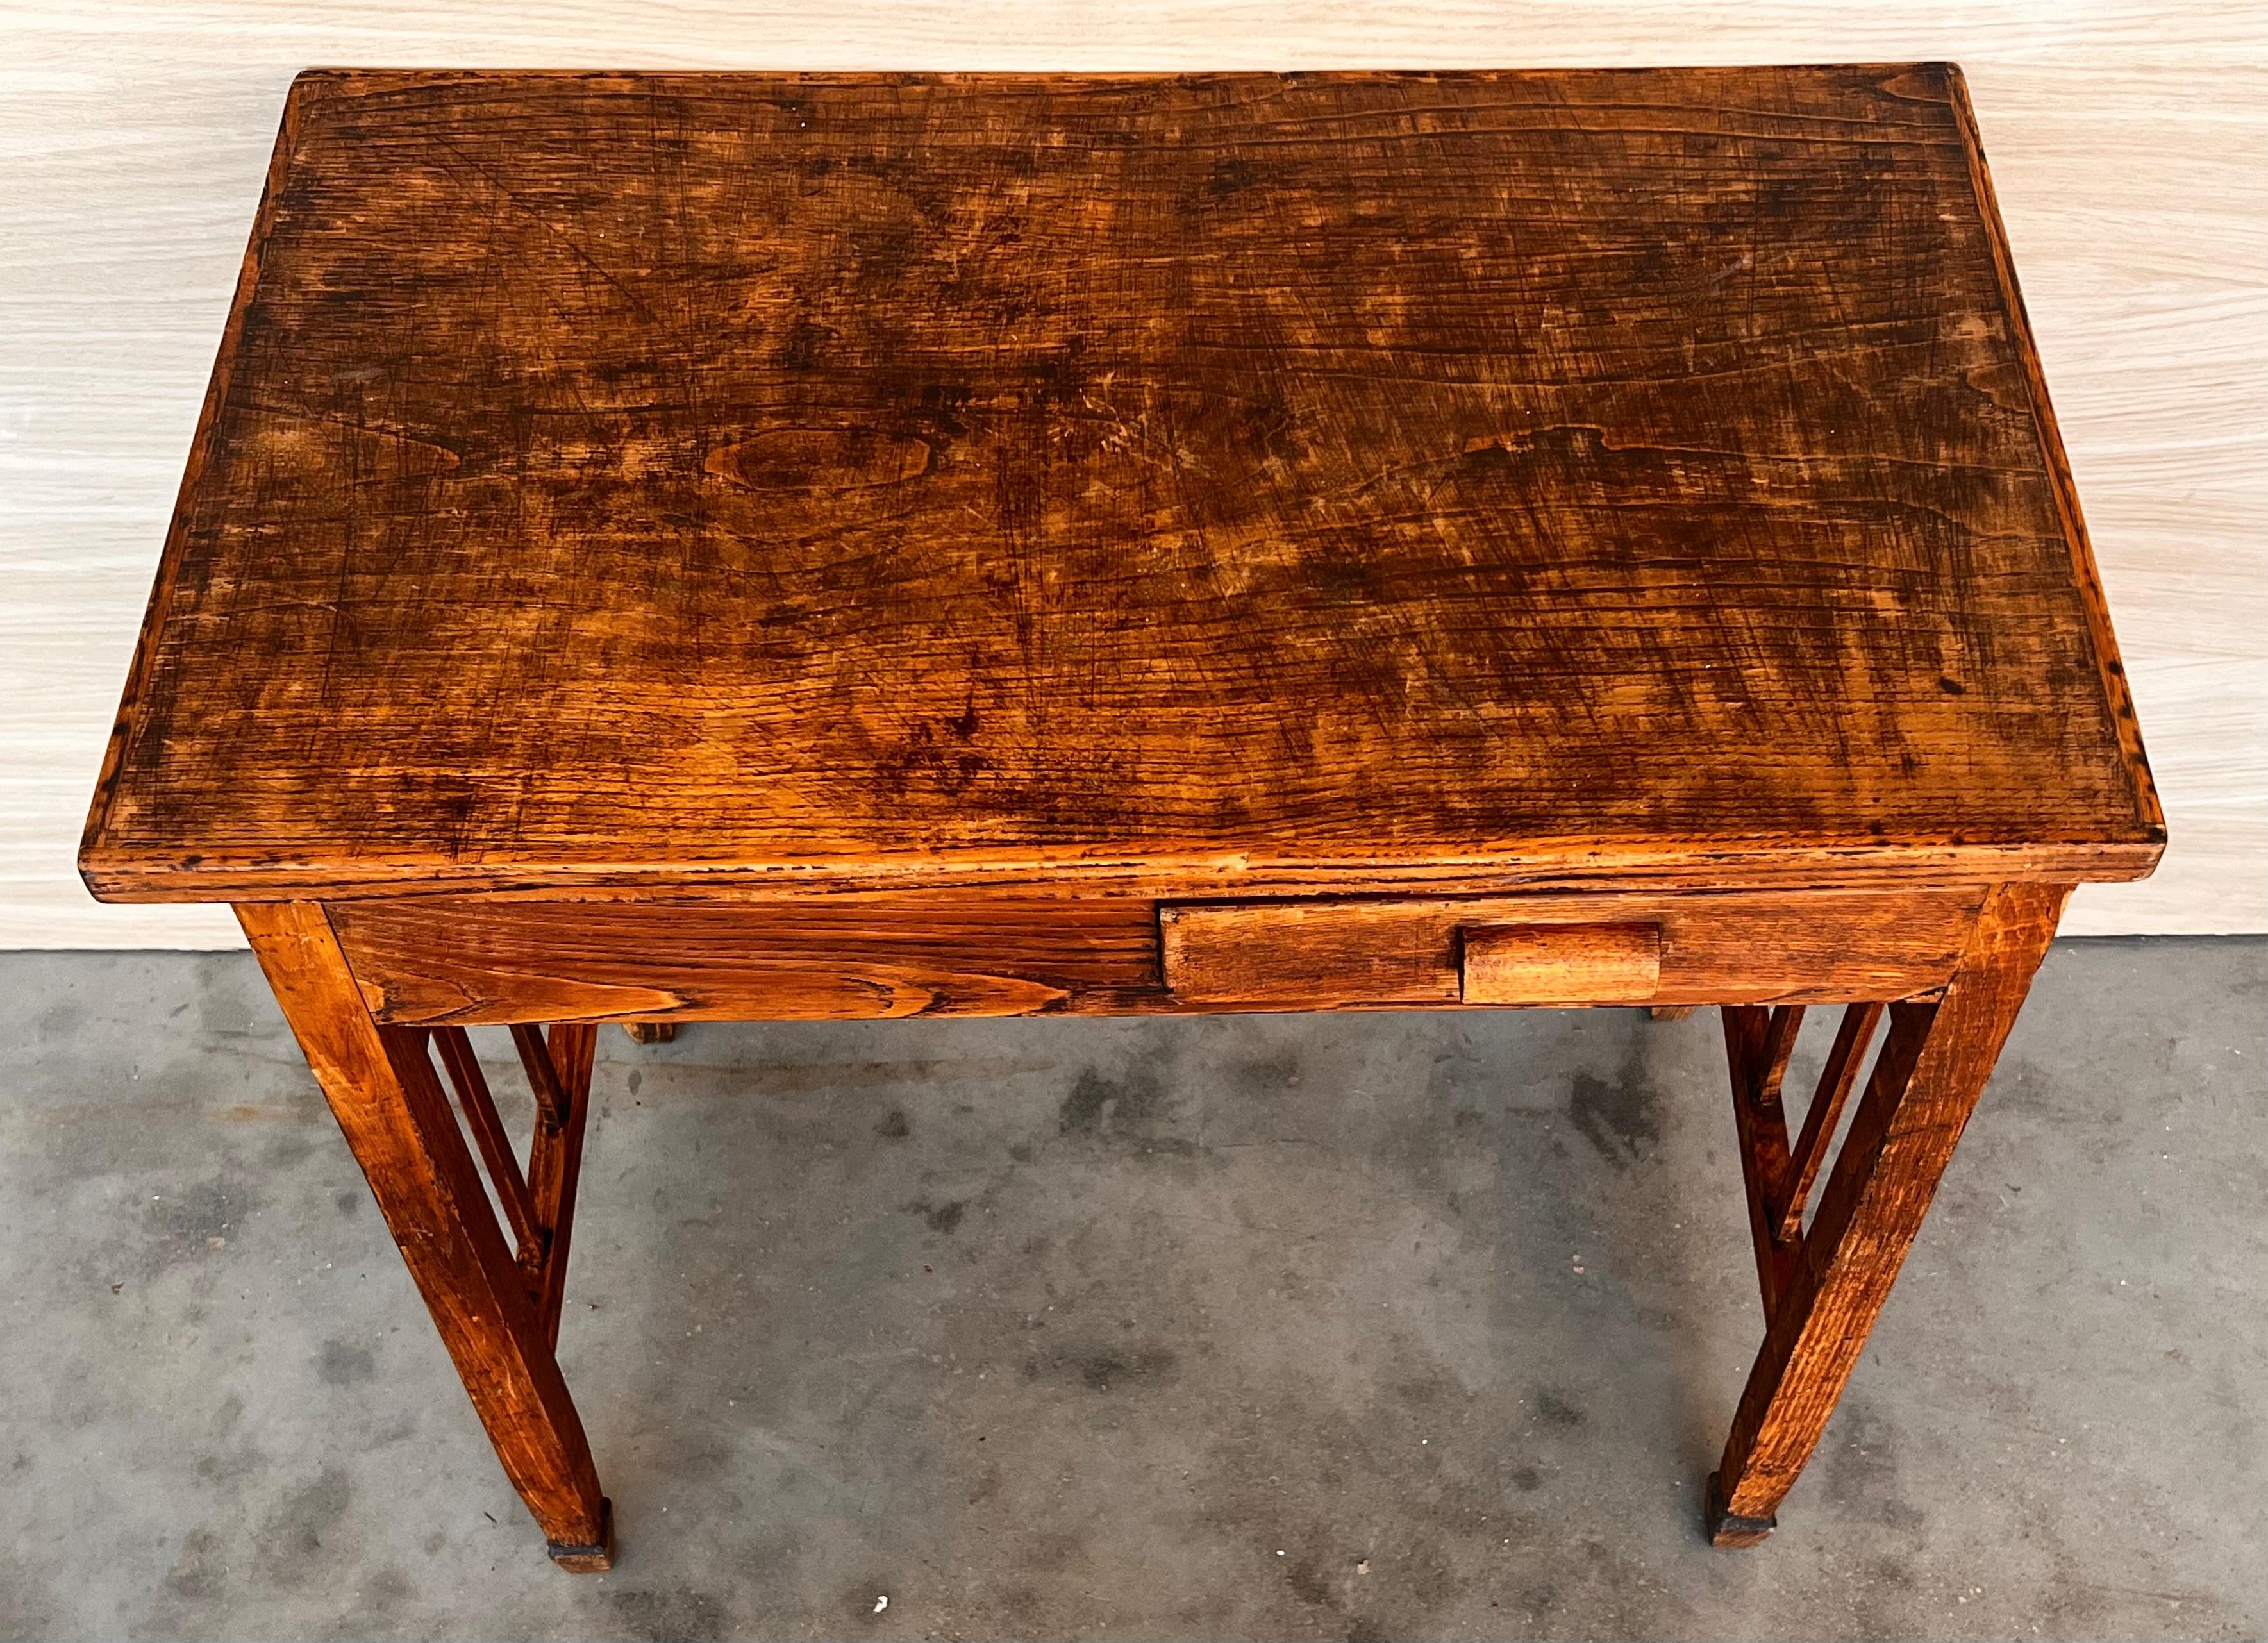 Early 19th Century Folk Art Side Table or Desk, Scandinavia In Good Condition For Sale In Miami, FL